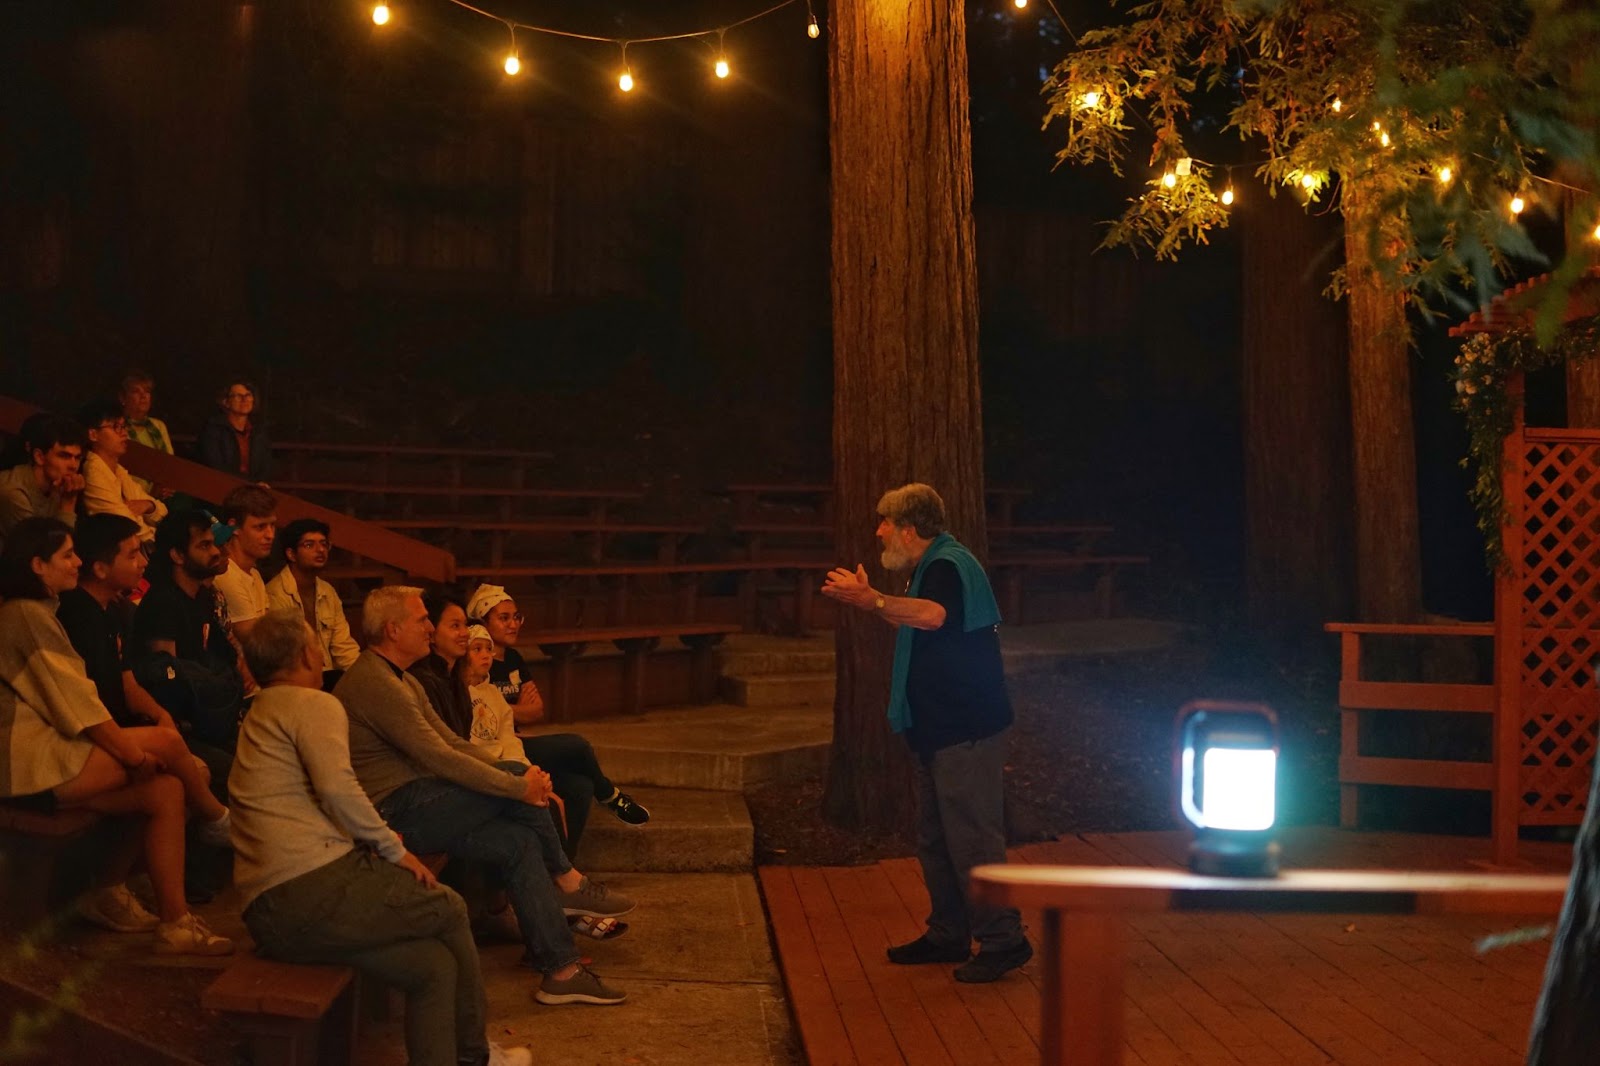 Mr. Joseph Lurie, animated, in the light of a portable lamp, reciting stories to everyone at the retreat. The setting is an amphitheater amidst redwoods.